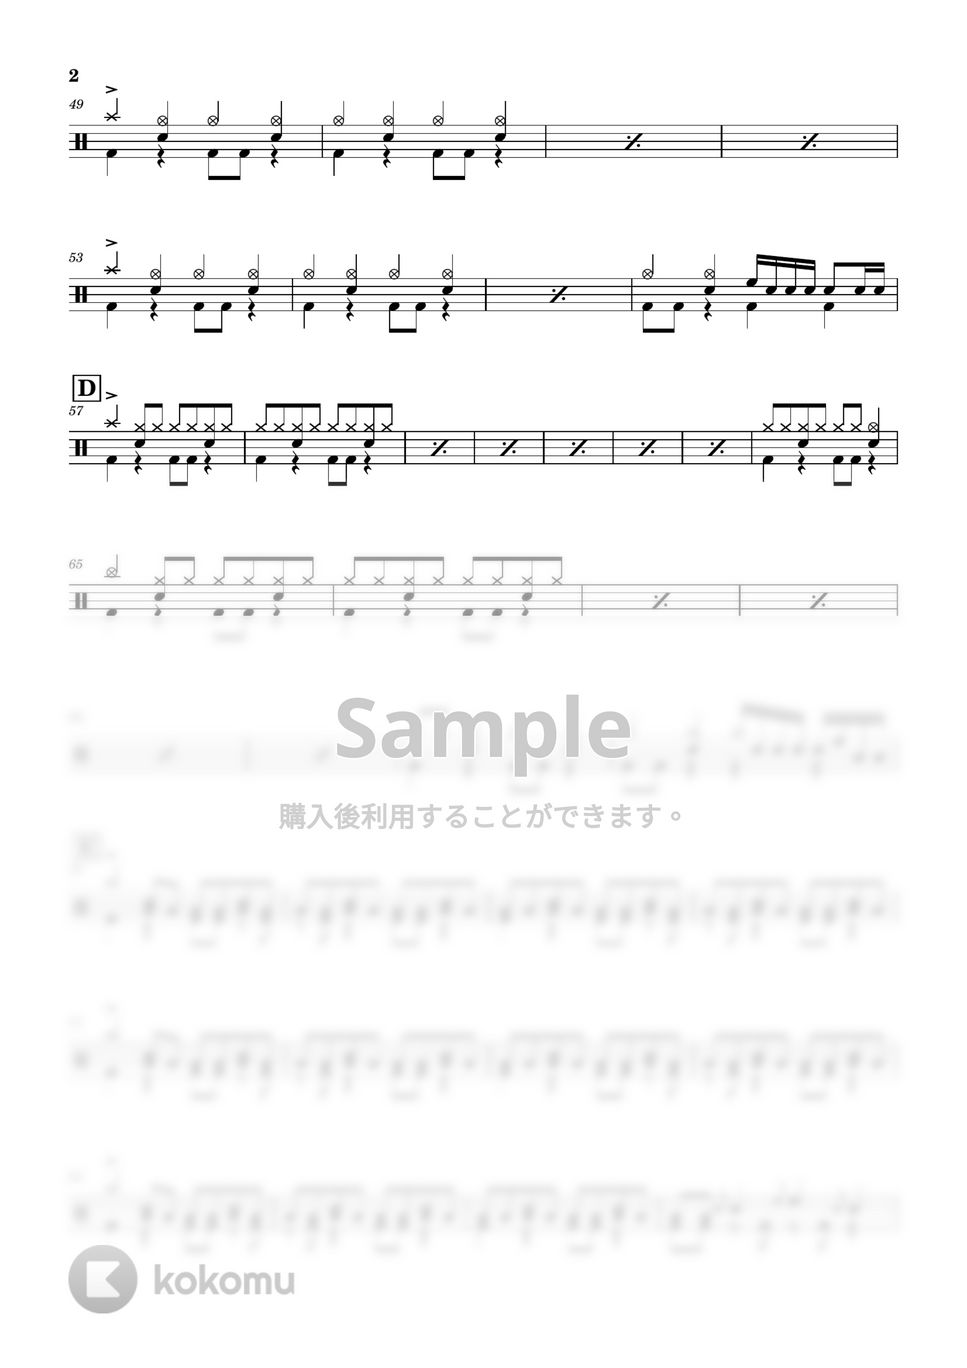 ASIAN KUNG-FU GENERATION - ソラニン by Cookie's Drum Score